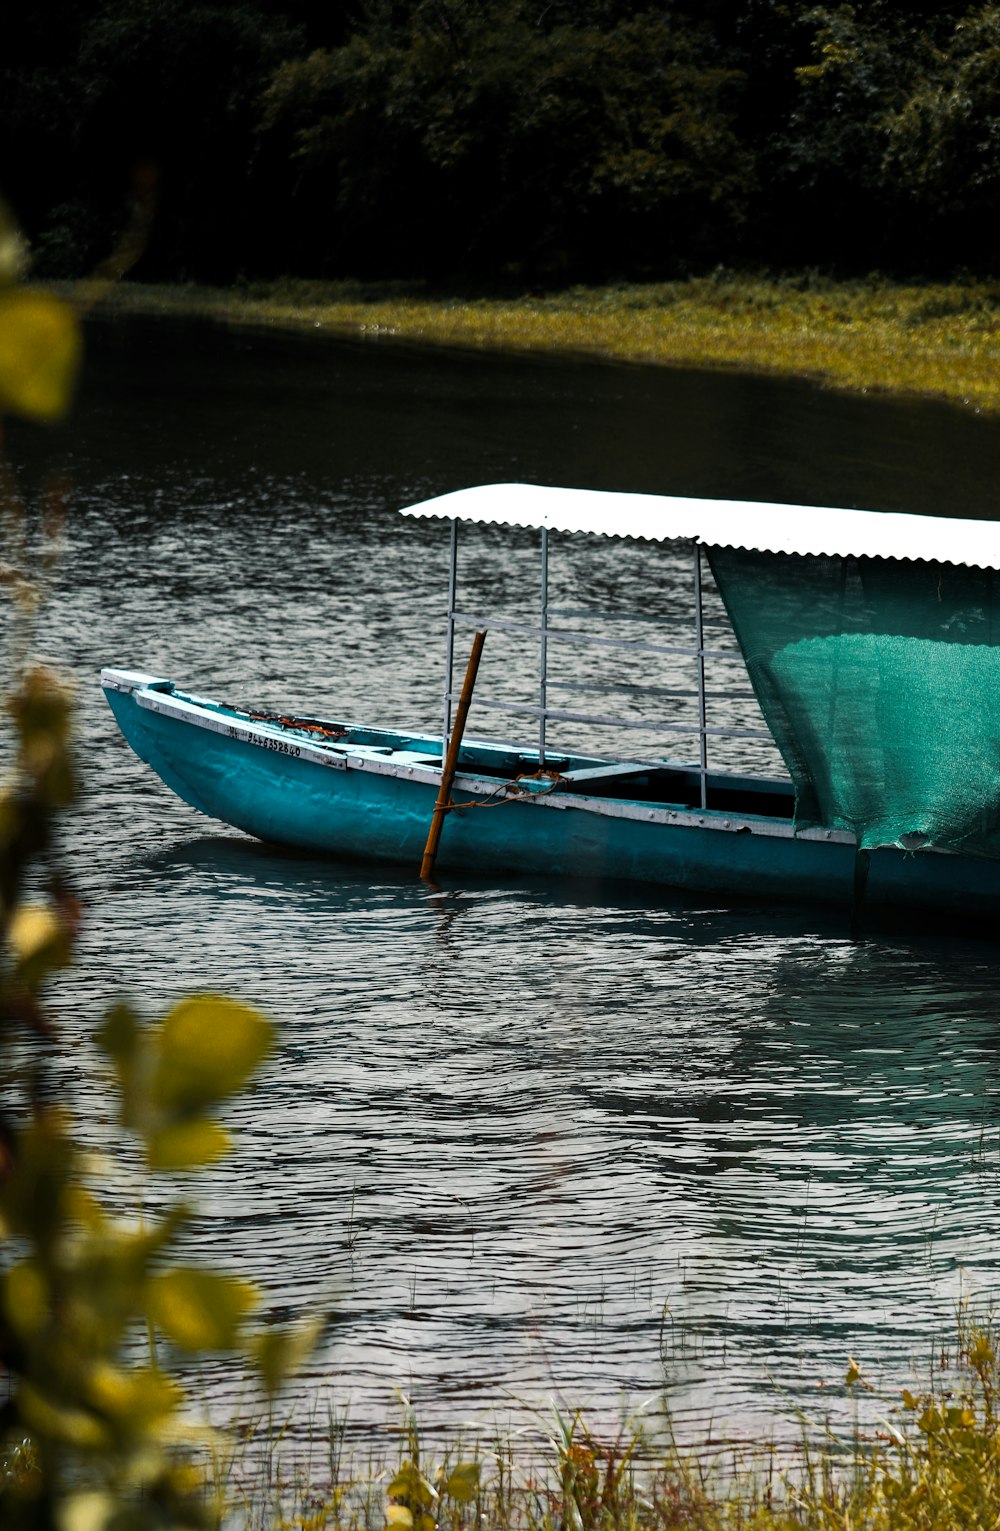 blue and white boat on water during daytime